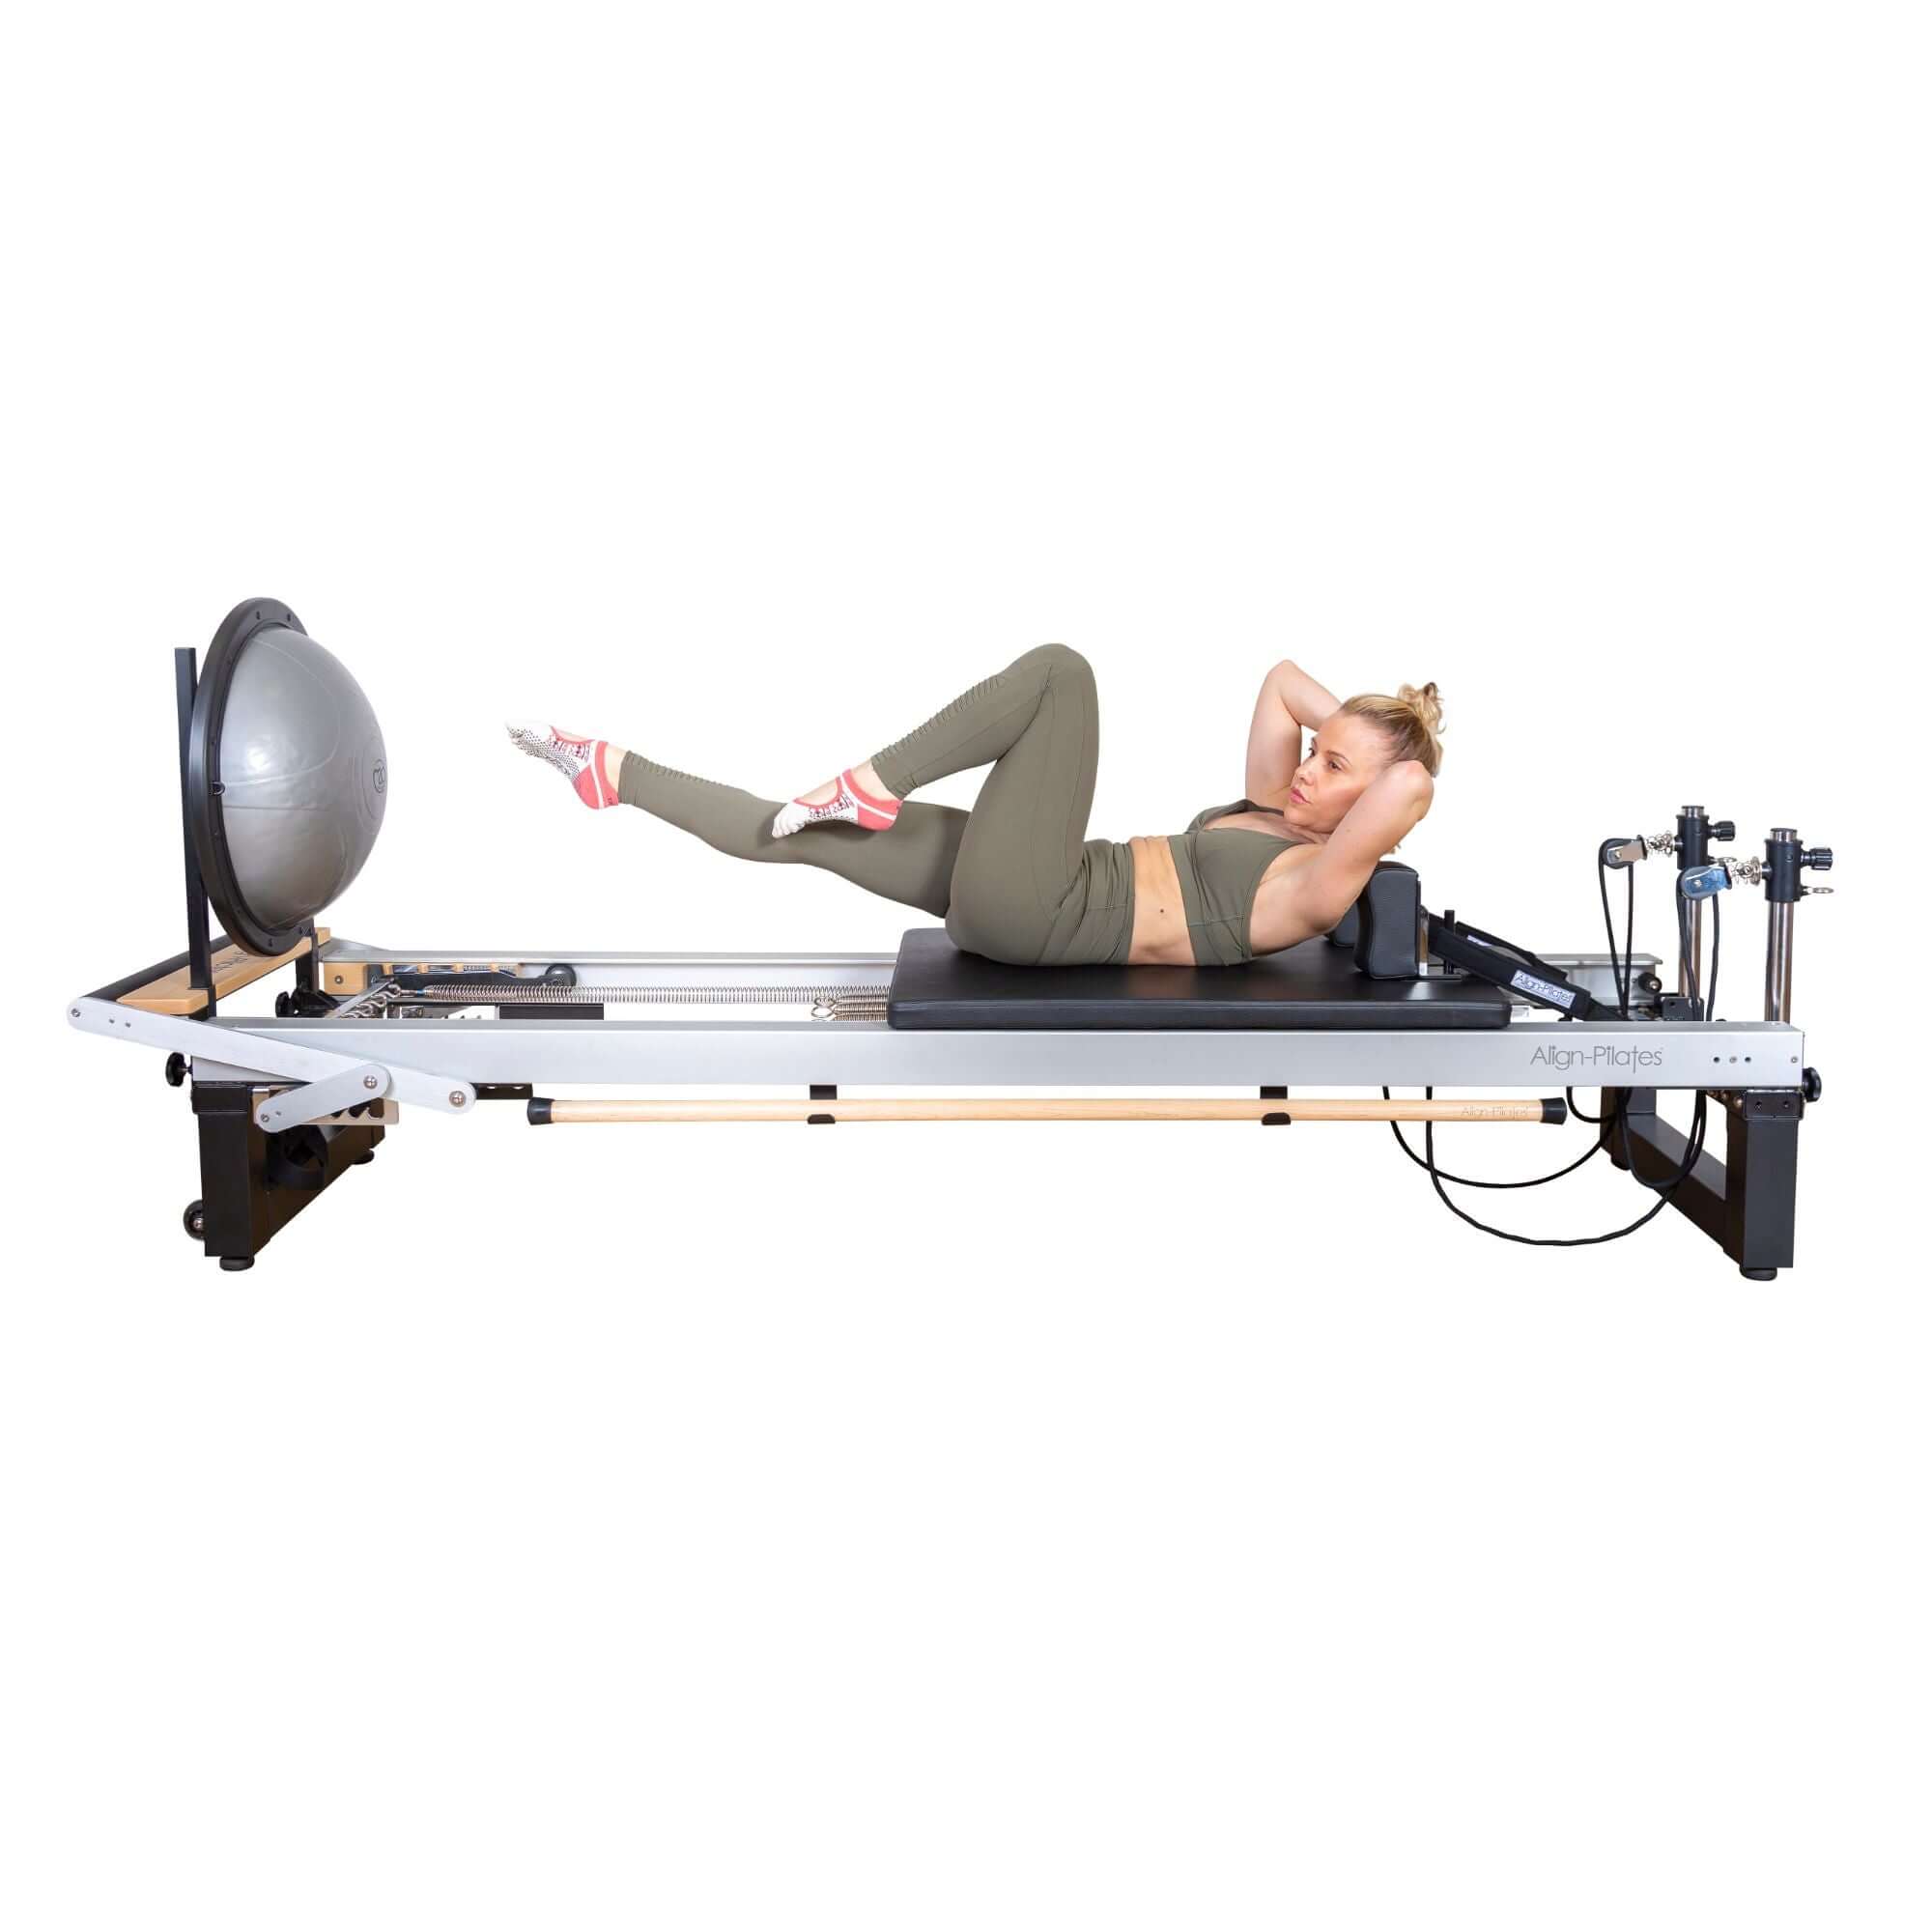 Athlete performing advanced Pilates moves on the Align Pilates A8 Pro Reformer, demonstrating its durability.